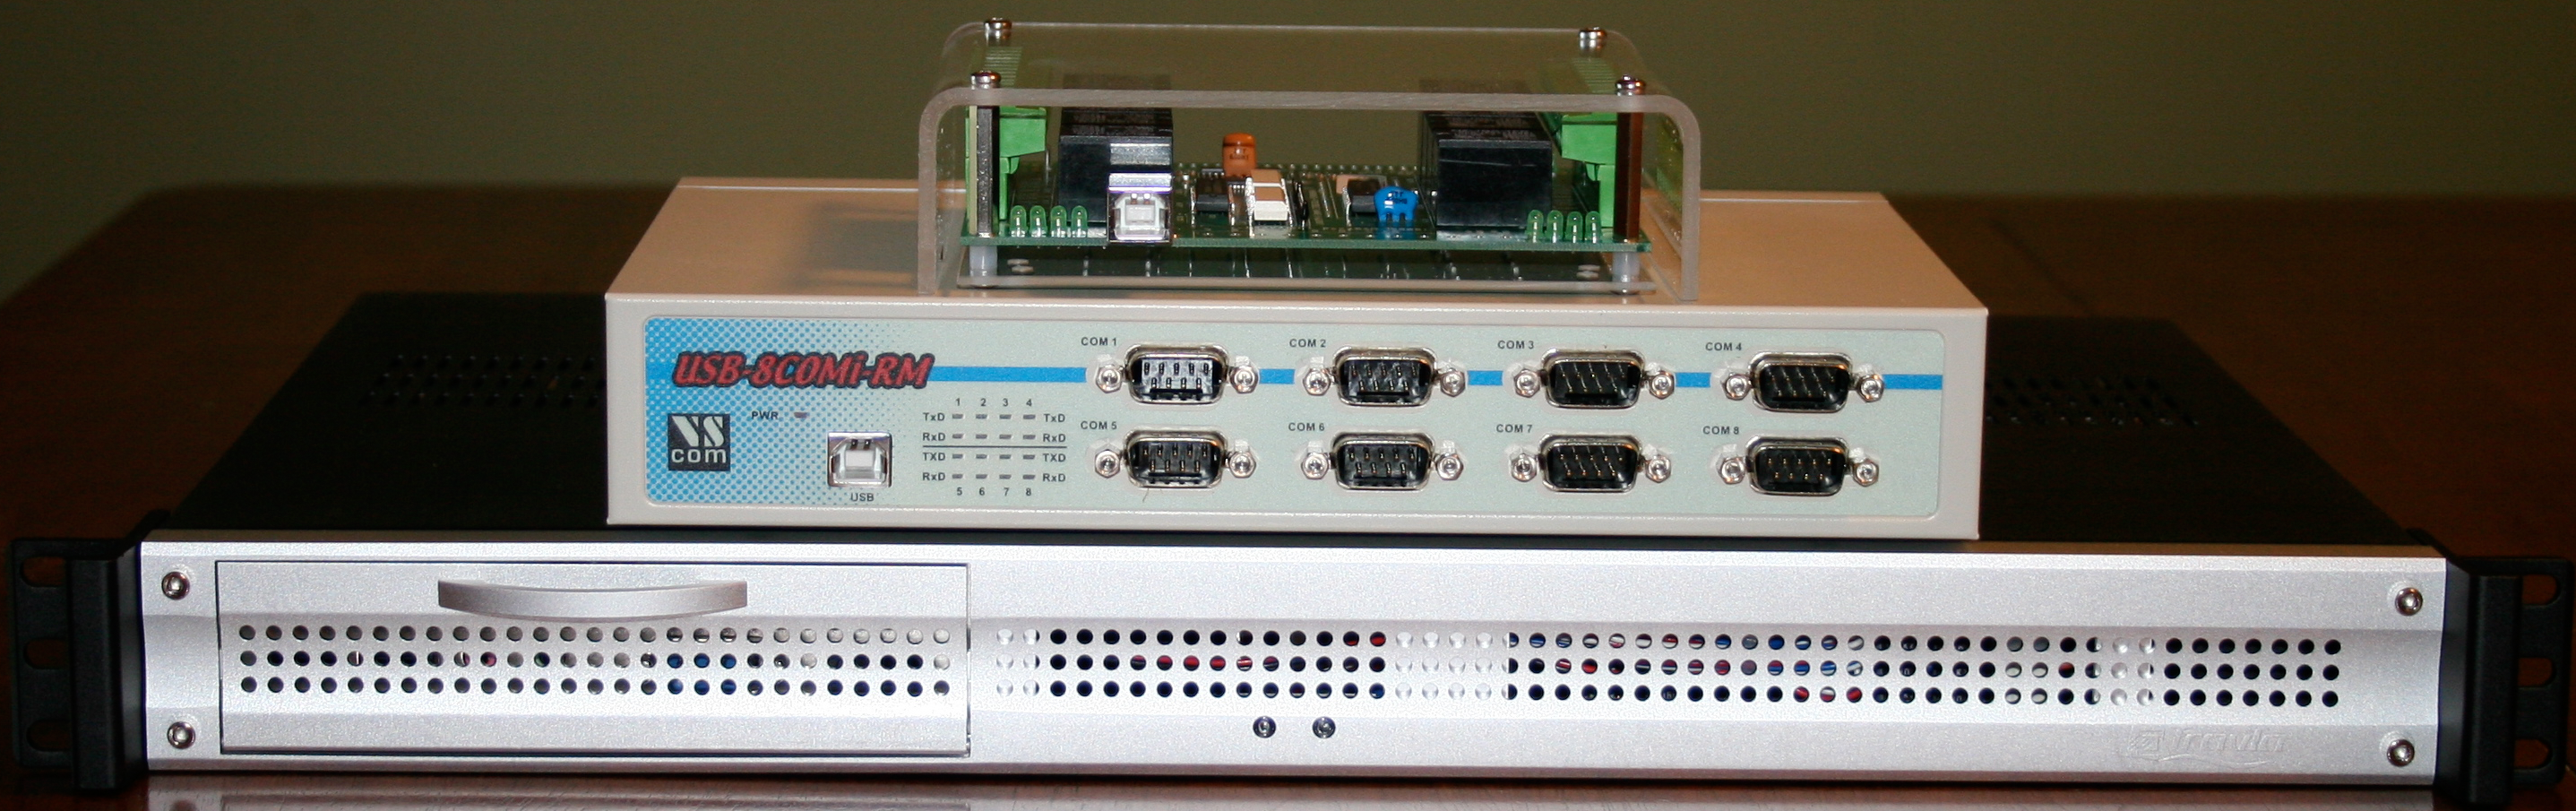 LSL LPN-SEC Standard Hardware with 8 Port Relay and 8 Port external serial interface